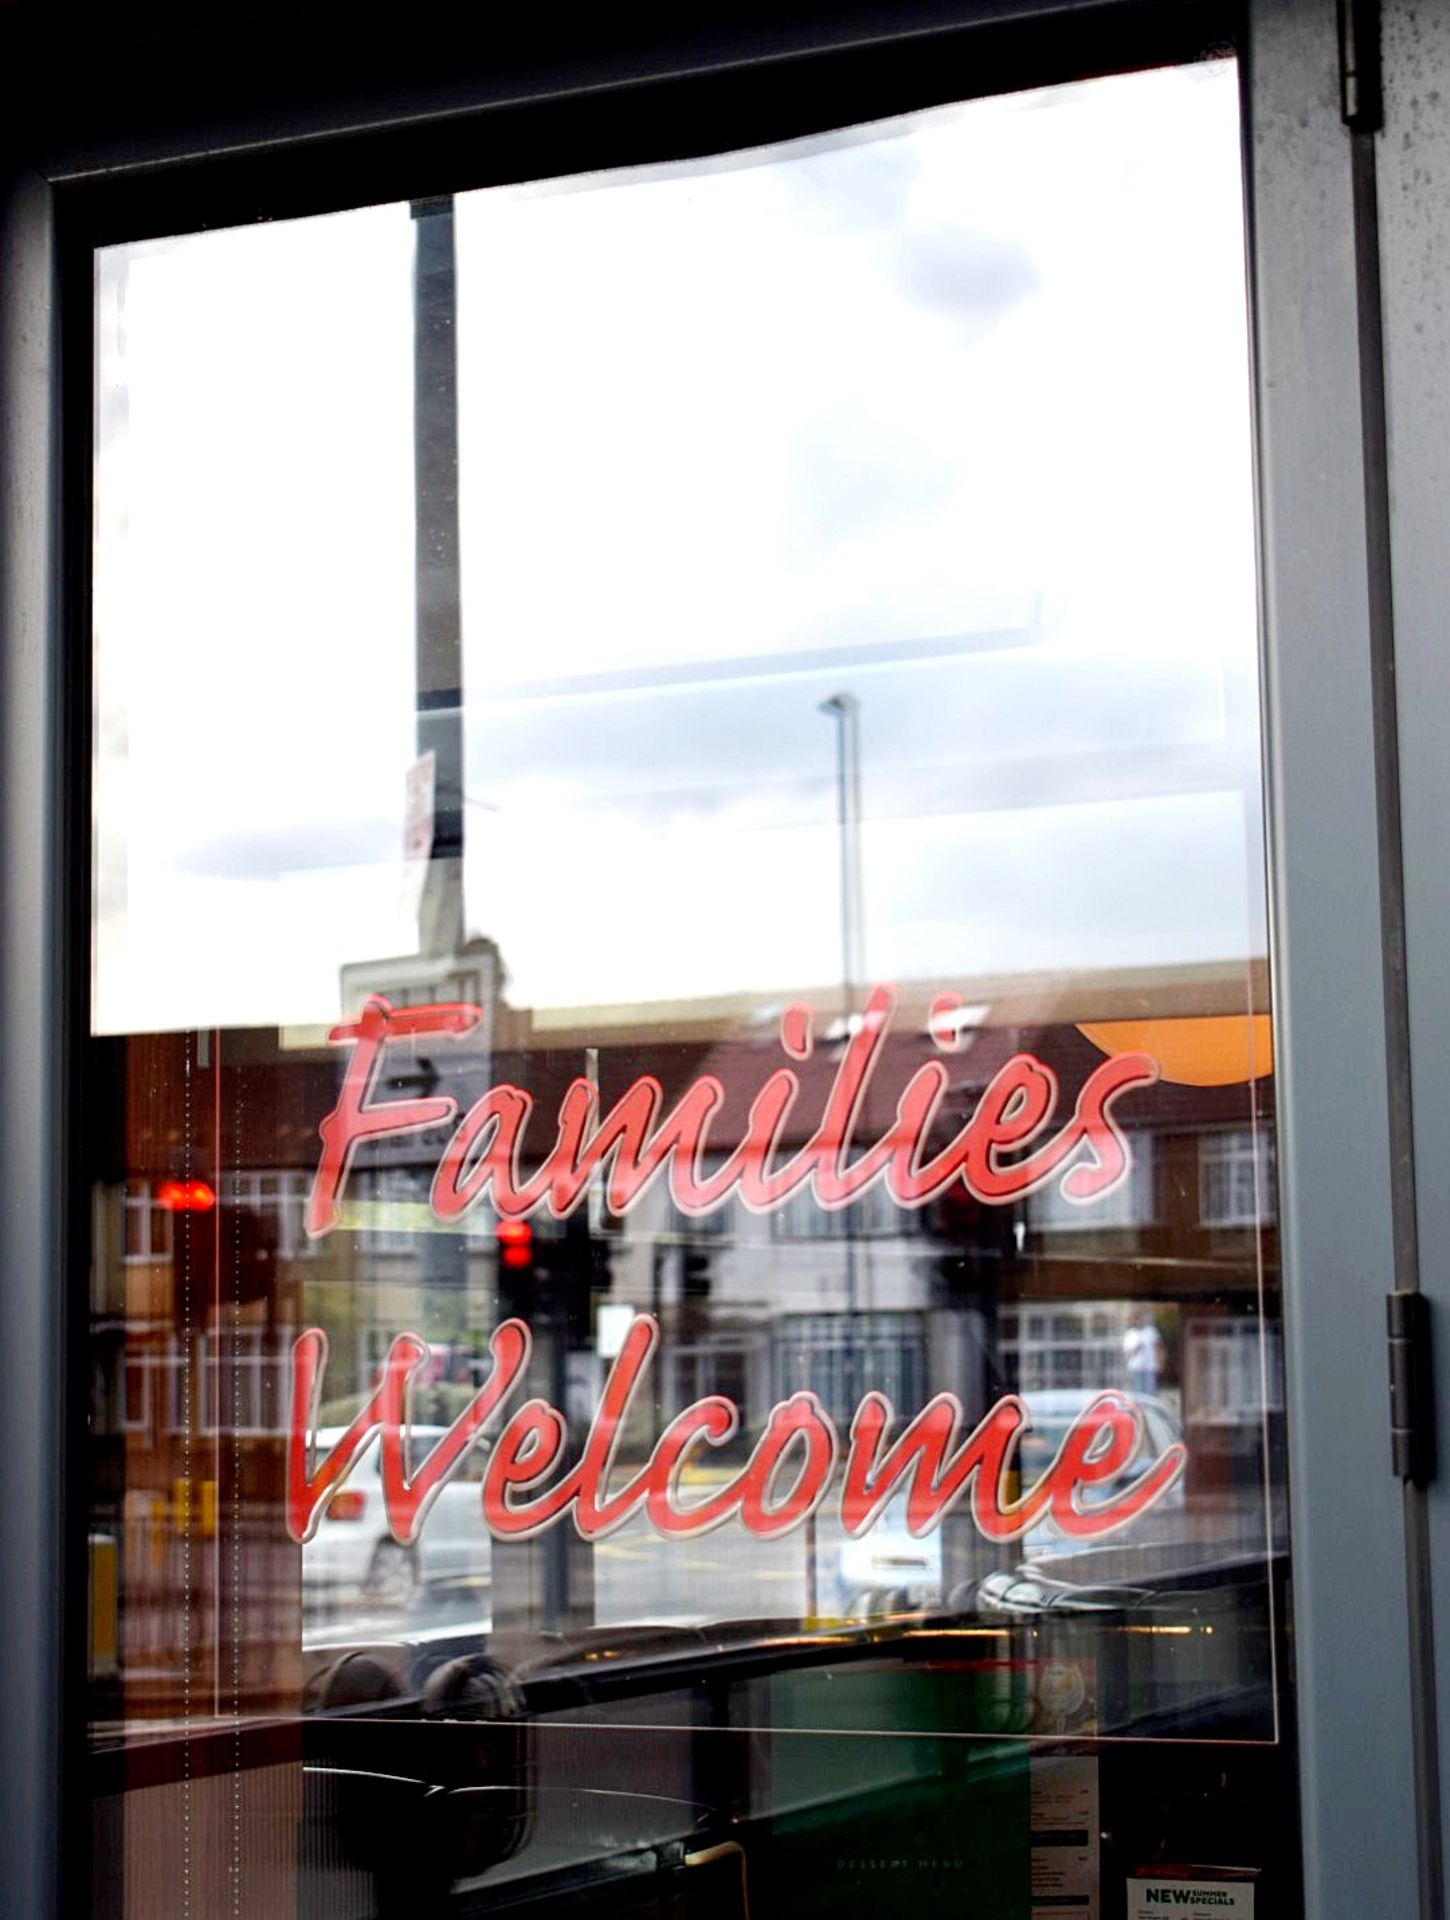 1 x Neon Effect Illuminated FAMILIES WELCOME Hanging Acrylic Sign - 65 x 60 cms - CL499 - - Image 2 of 2